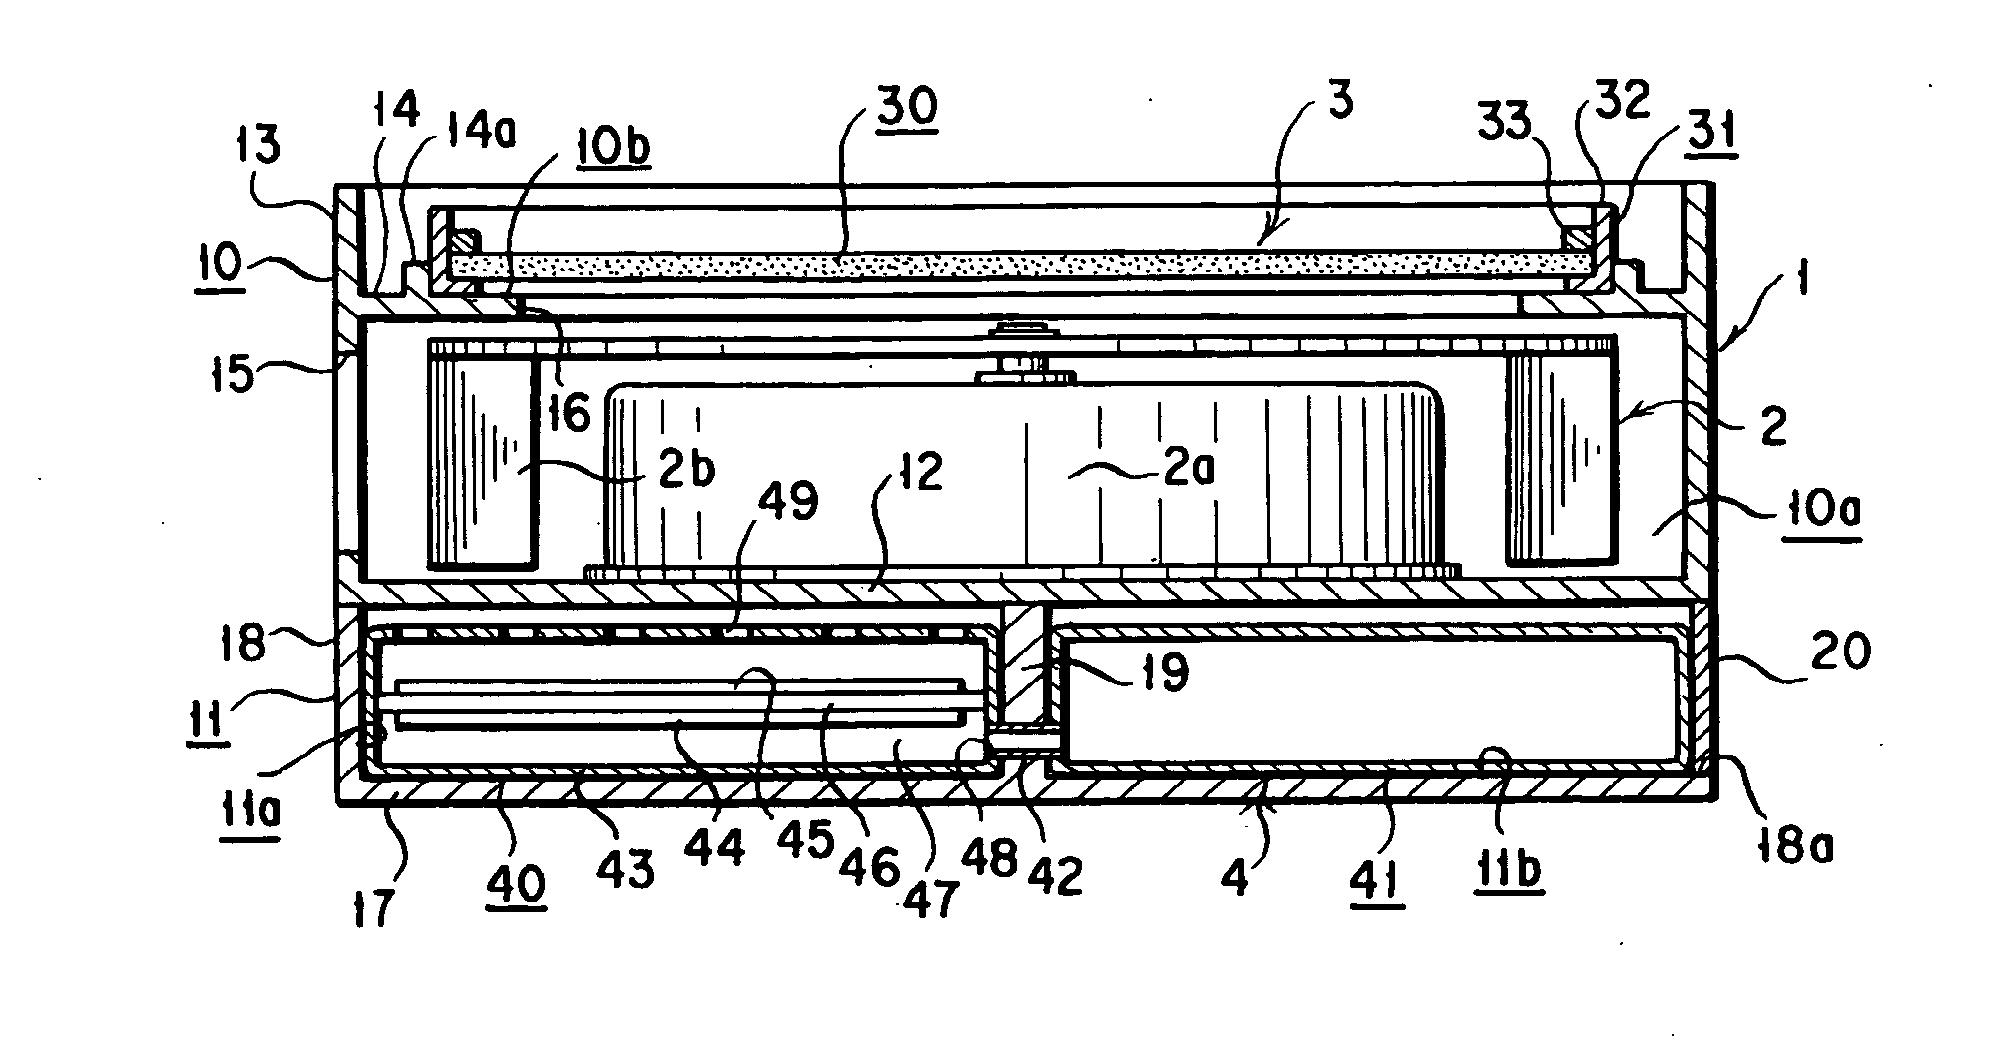 Blower type chemical diffusing apparatus with fuel cell power supply